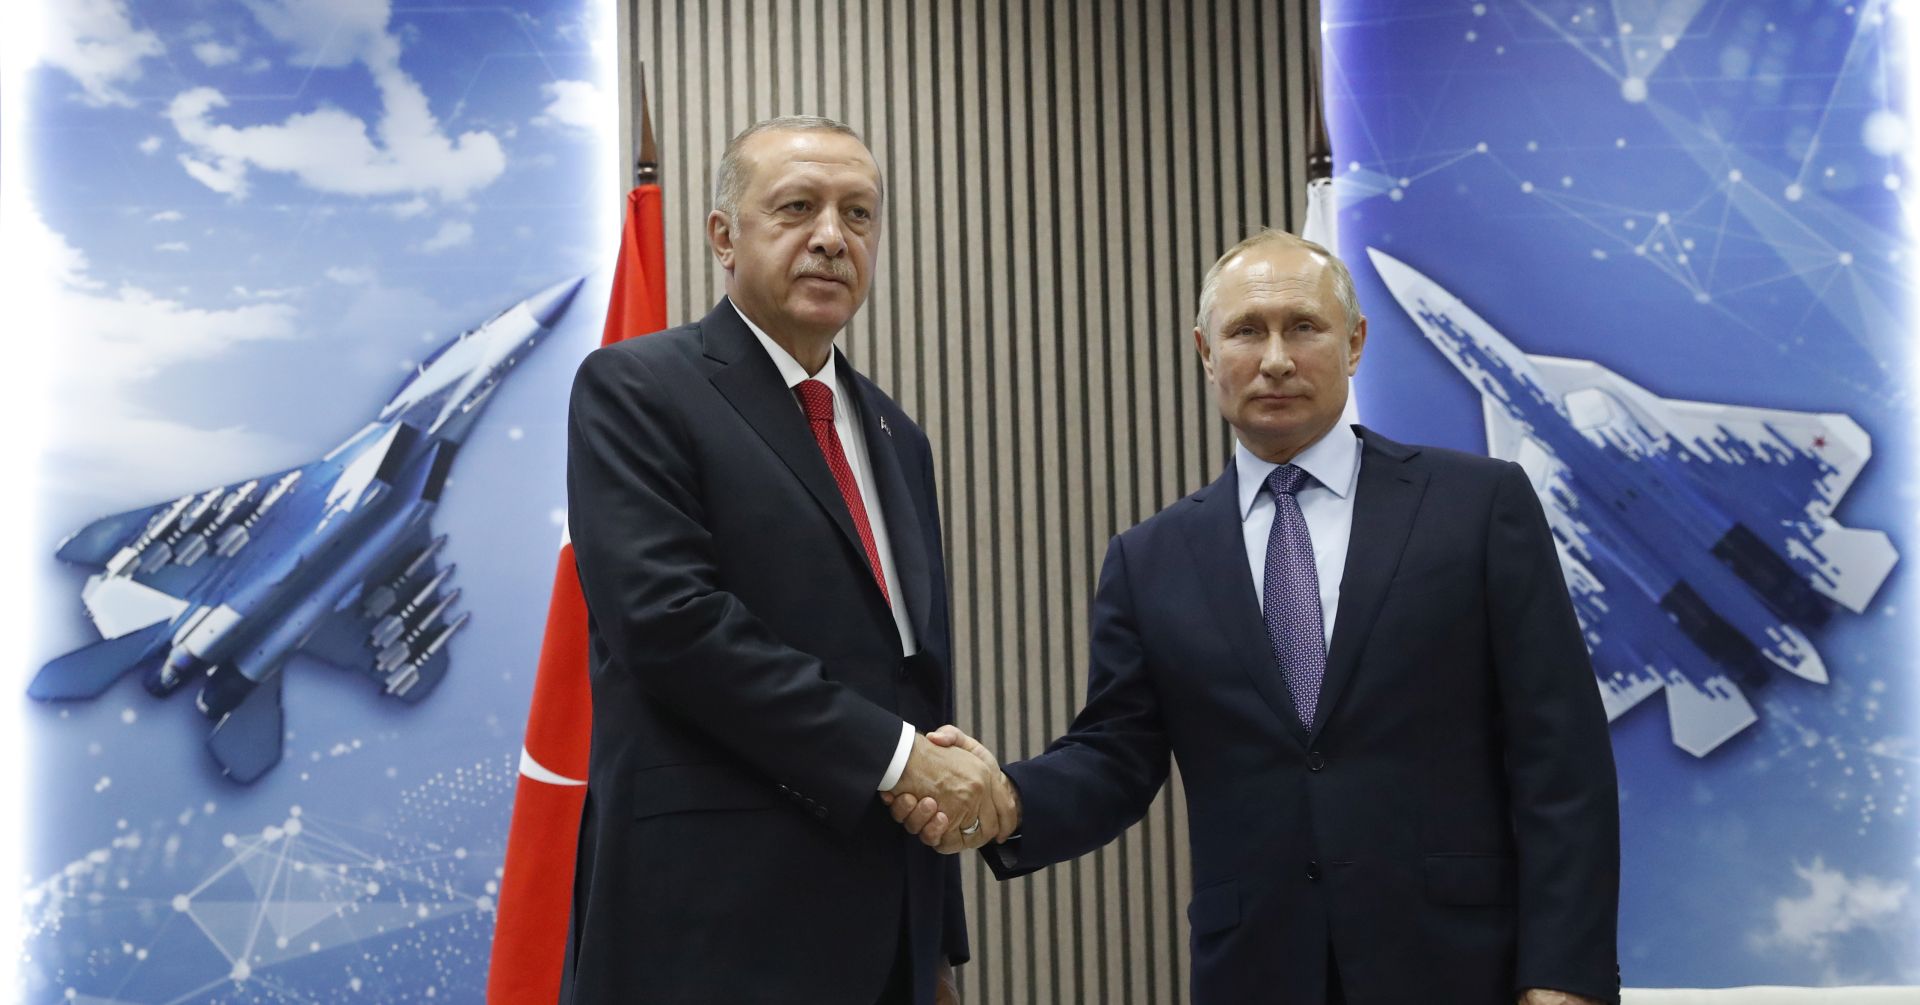 epa07797282 Russian President Vladimir Putin (R) and Turkish President Recep Tayyip Erdogan (L) shake hands during their meeting on the sidelines of the MAKS-2019 International Aviation and Space Salon in Zhukovsky outside Moscow, Russia, 27 August 2019. Turkish President is on a short working visit in Russia.  EPA/MAXIM SHIPENKOV / POOL